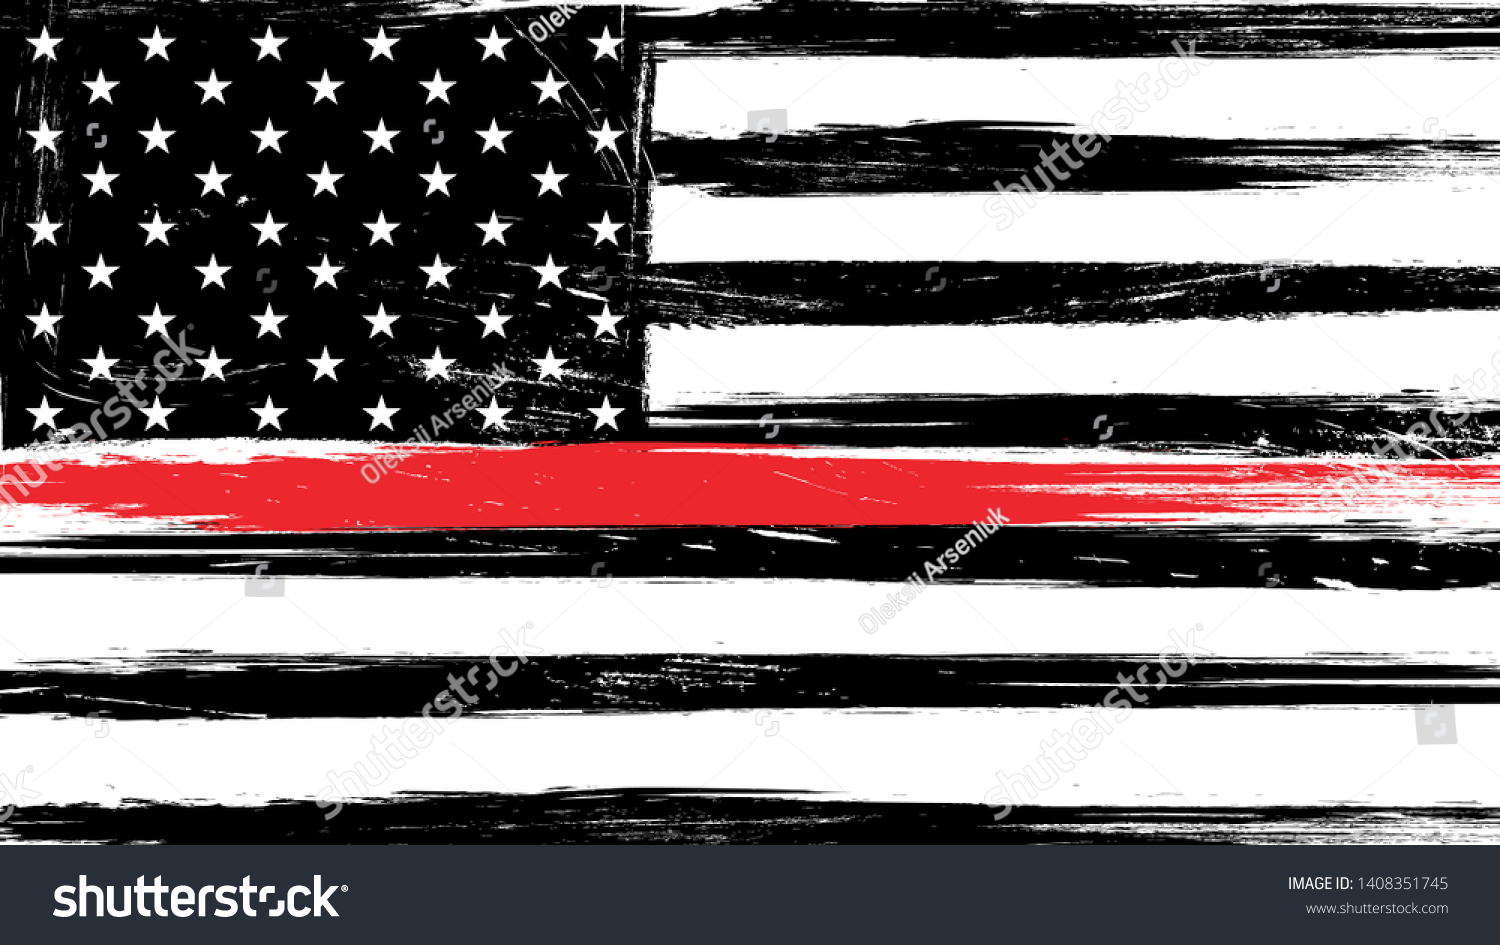 SVG of Grunge USA flag with a thin red line - a sign to honor and respect american firefighters svg